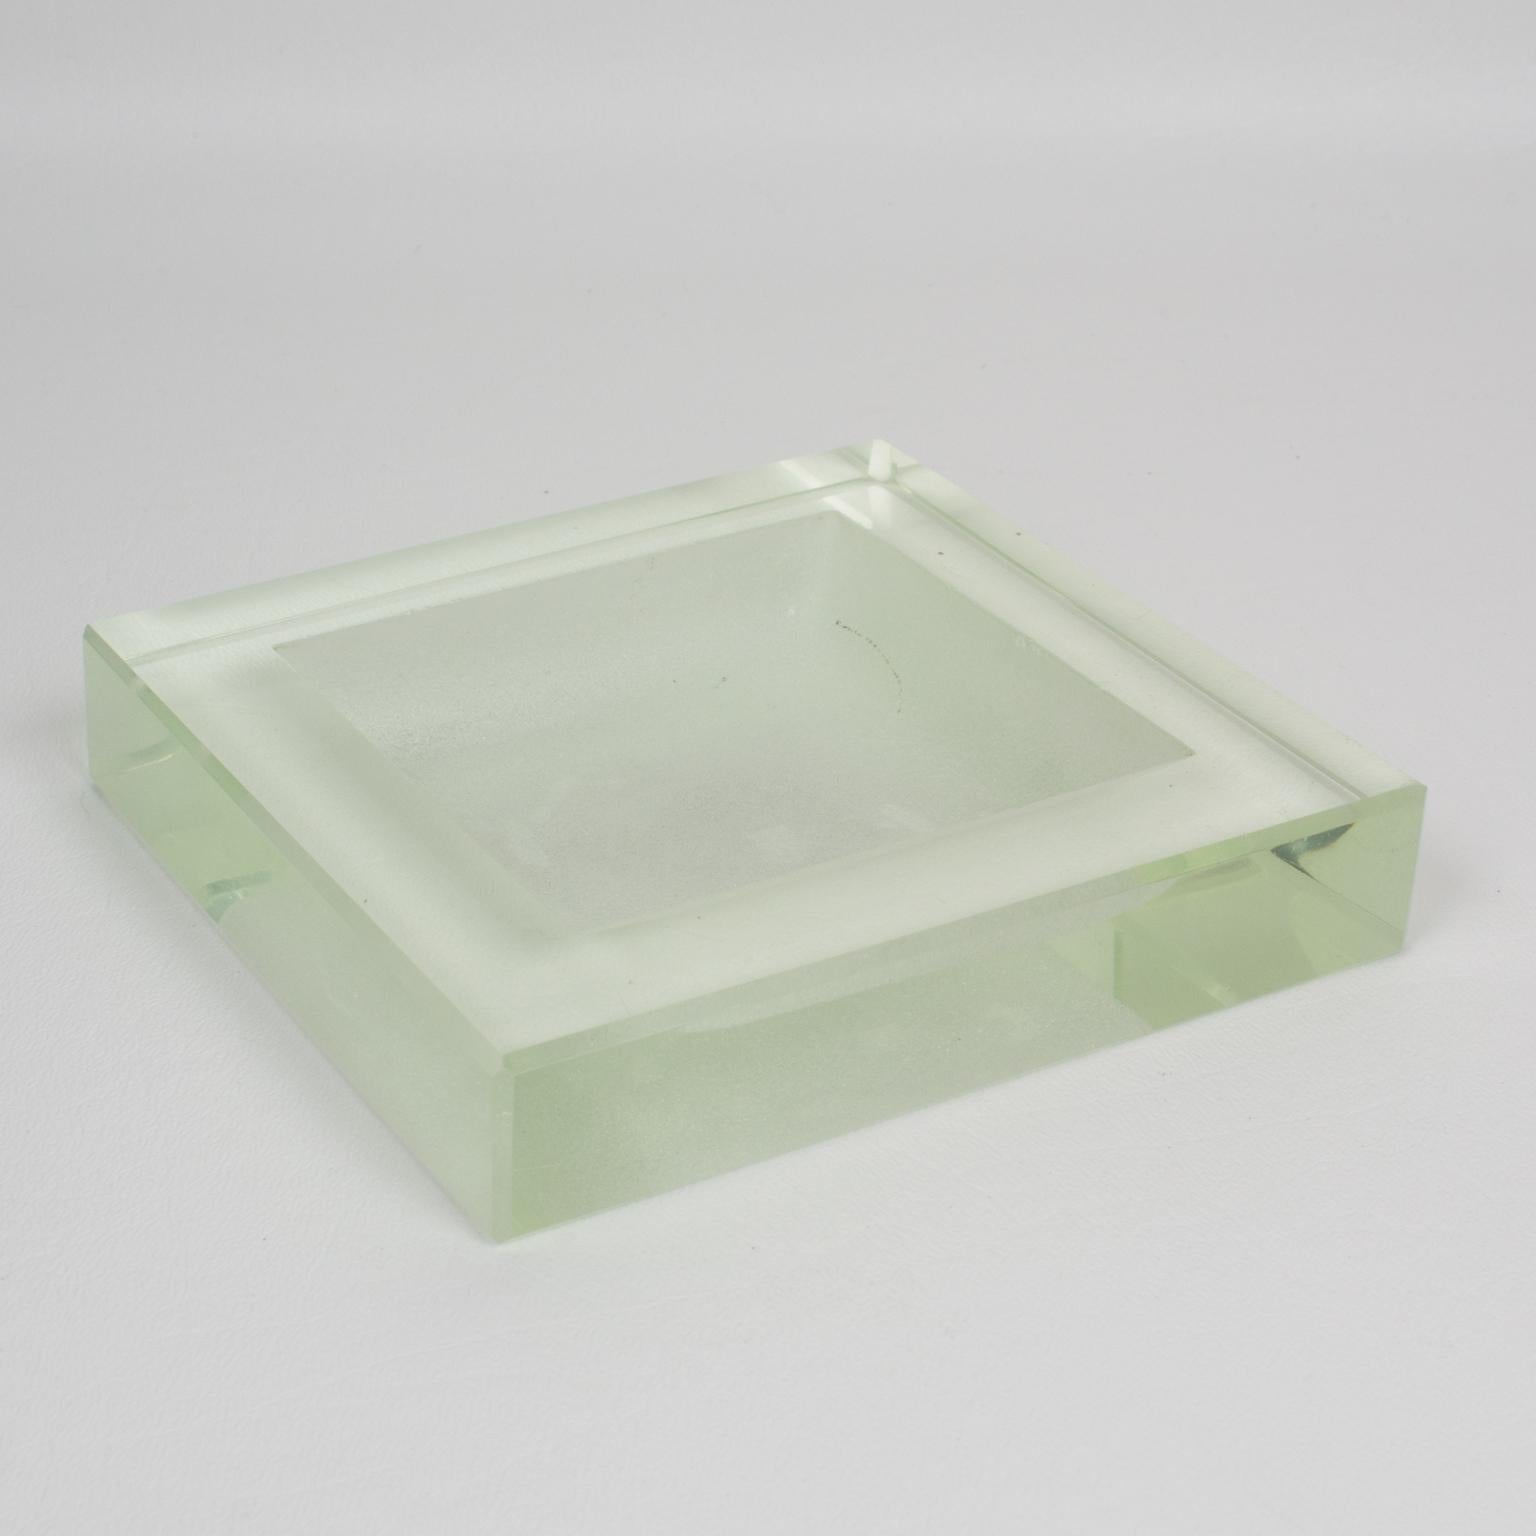 Elegant Art Deco thick clear glass slab ashtray or desk tidy by French designer Jean Luce (1895-1964). Square shape with an etched center in a frosted textured pattern. A perfect accessory for the desk as a catchall or a cigar ashtray as well as a